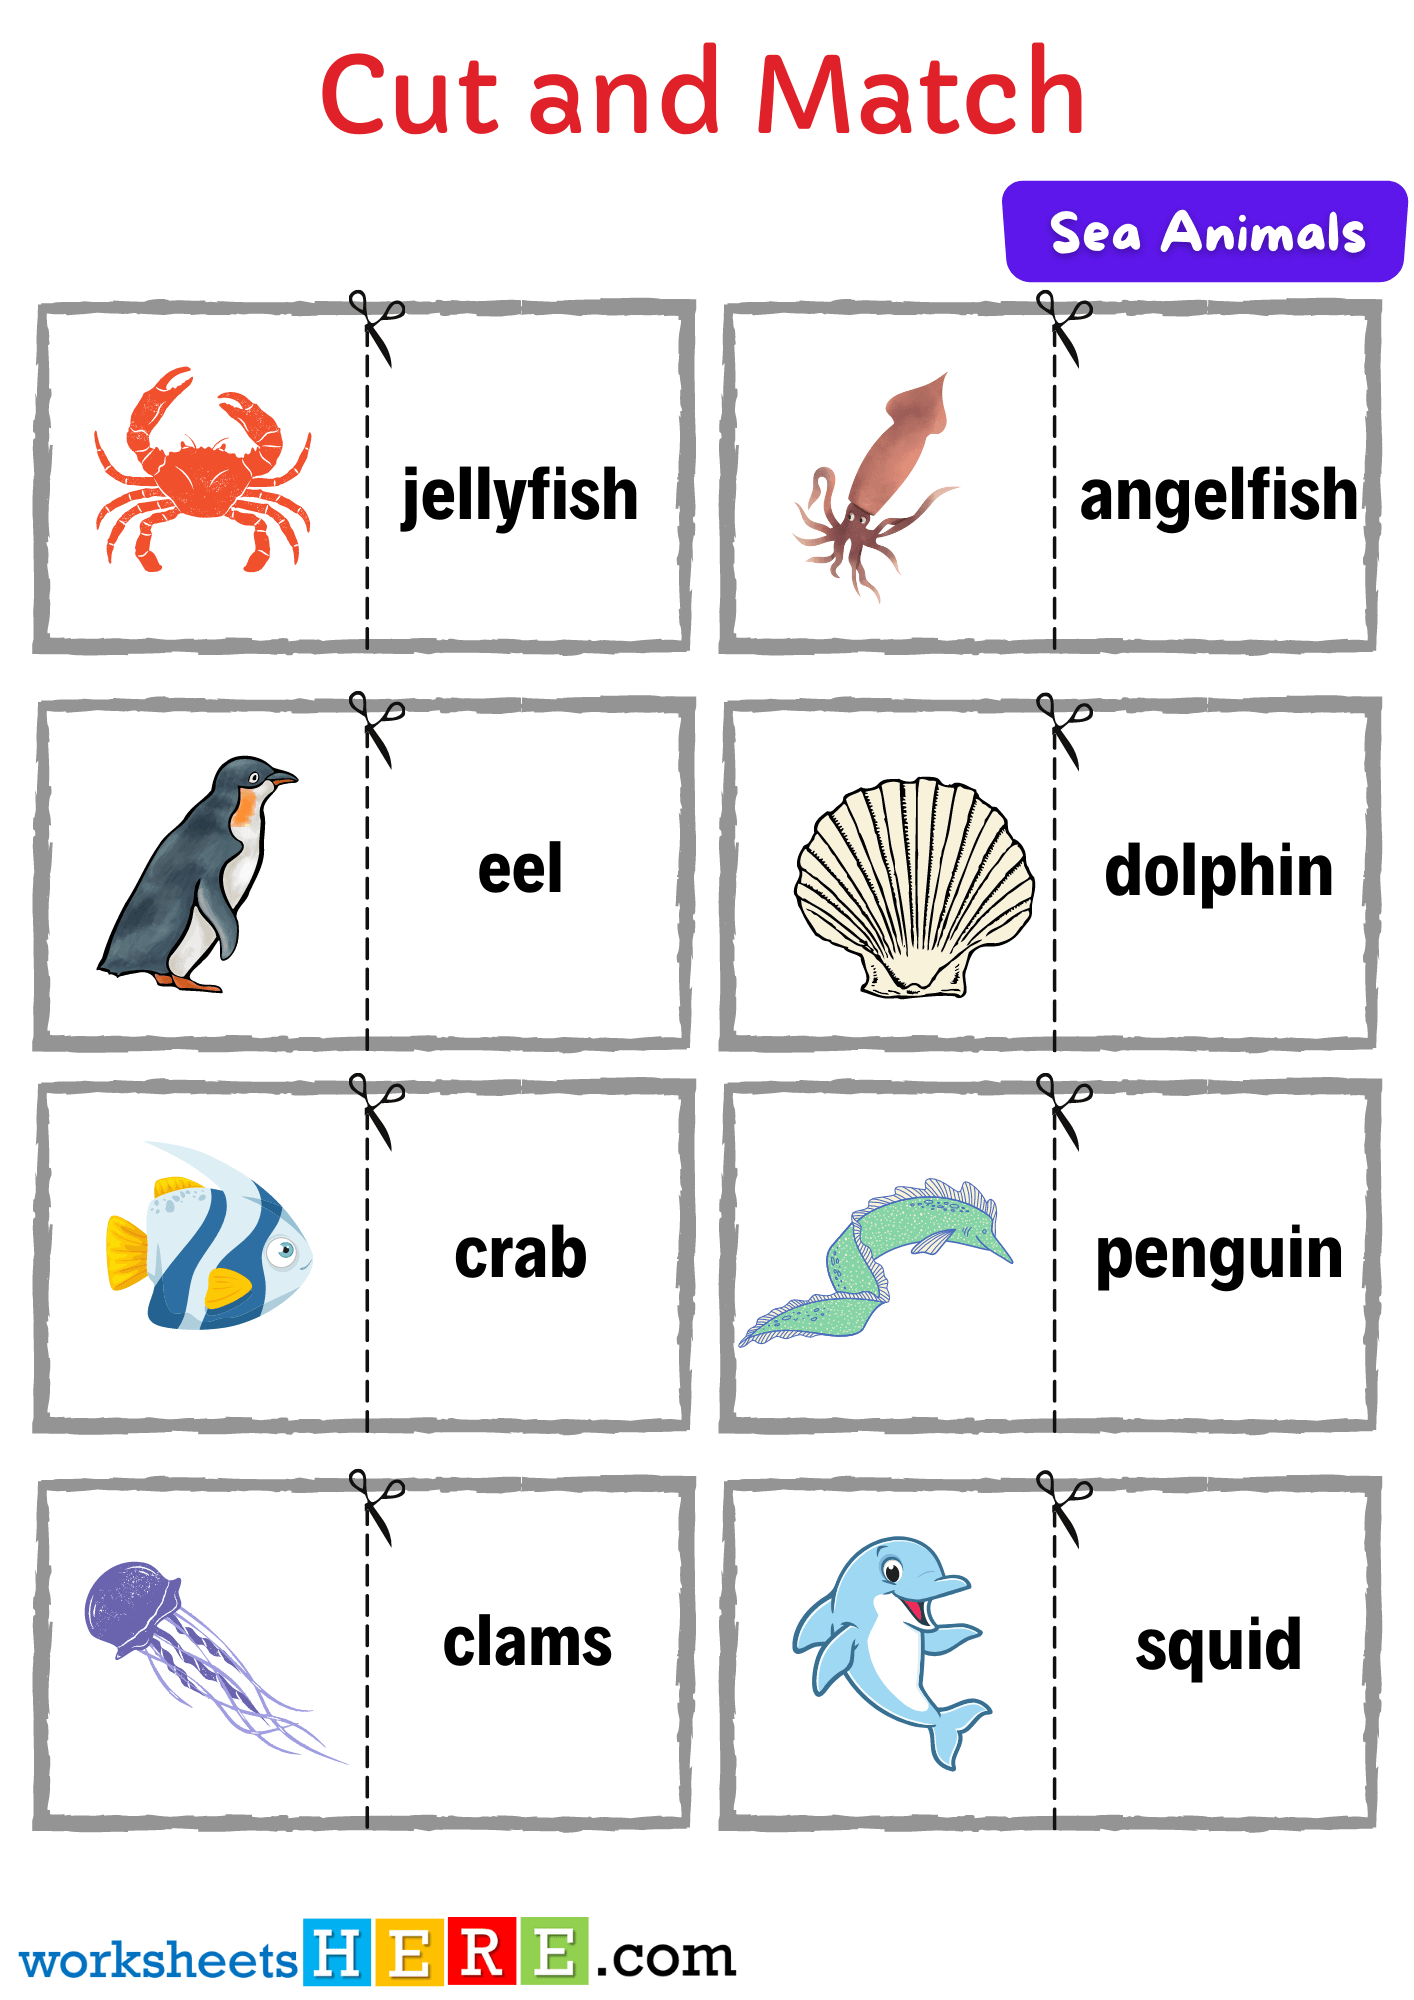 Cut and Match Sea Water Animals Words with Pictures Activity Worksheets For Kids